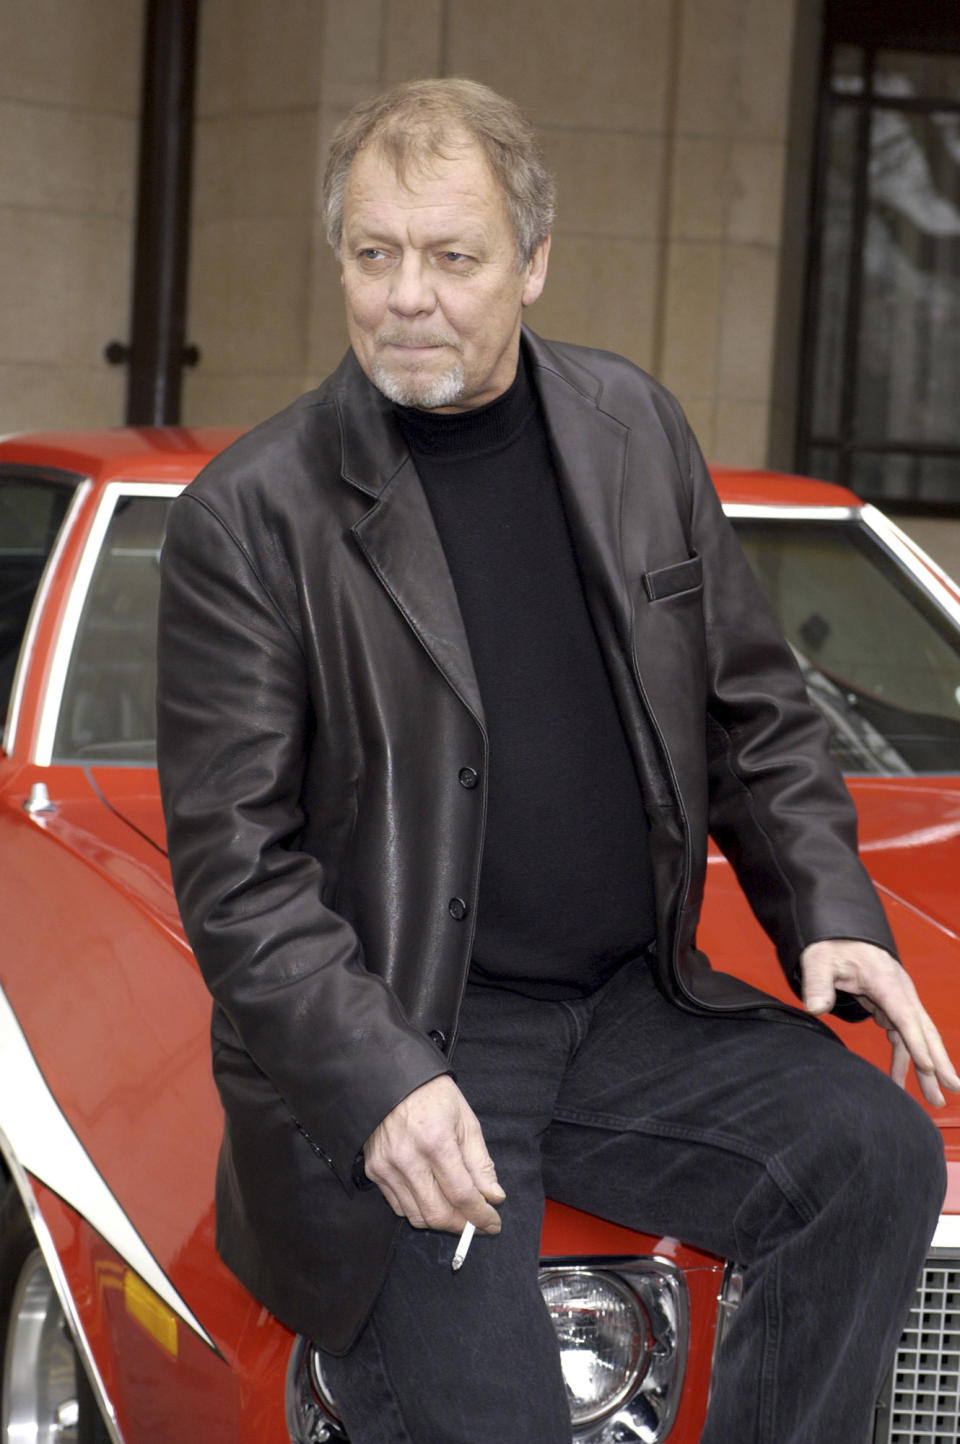 FILE - Actor David Soul sits outside the Dorchester Hotel ahead of the UK premiere of Starsky and Hutch, in London, March 11, 2004. The actor who earned fame as the blond half of a crime-fighting duo in the popular 1970s television series “Starsky and Hutch” has died. David Soul was 80. His wife, Helen Snell, said Friday, Jan. 5, 2024 that Soul died on Thursday "after a valiant battle for life in the loving company of family.” (Yui Mok/PA via AP, File)